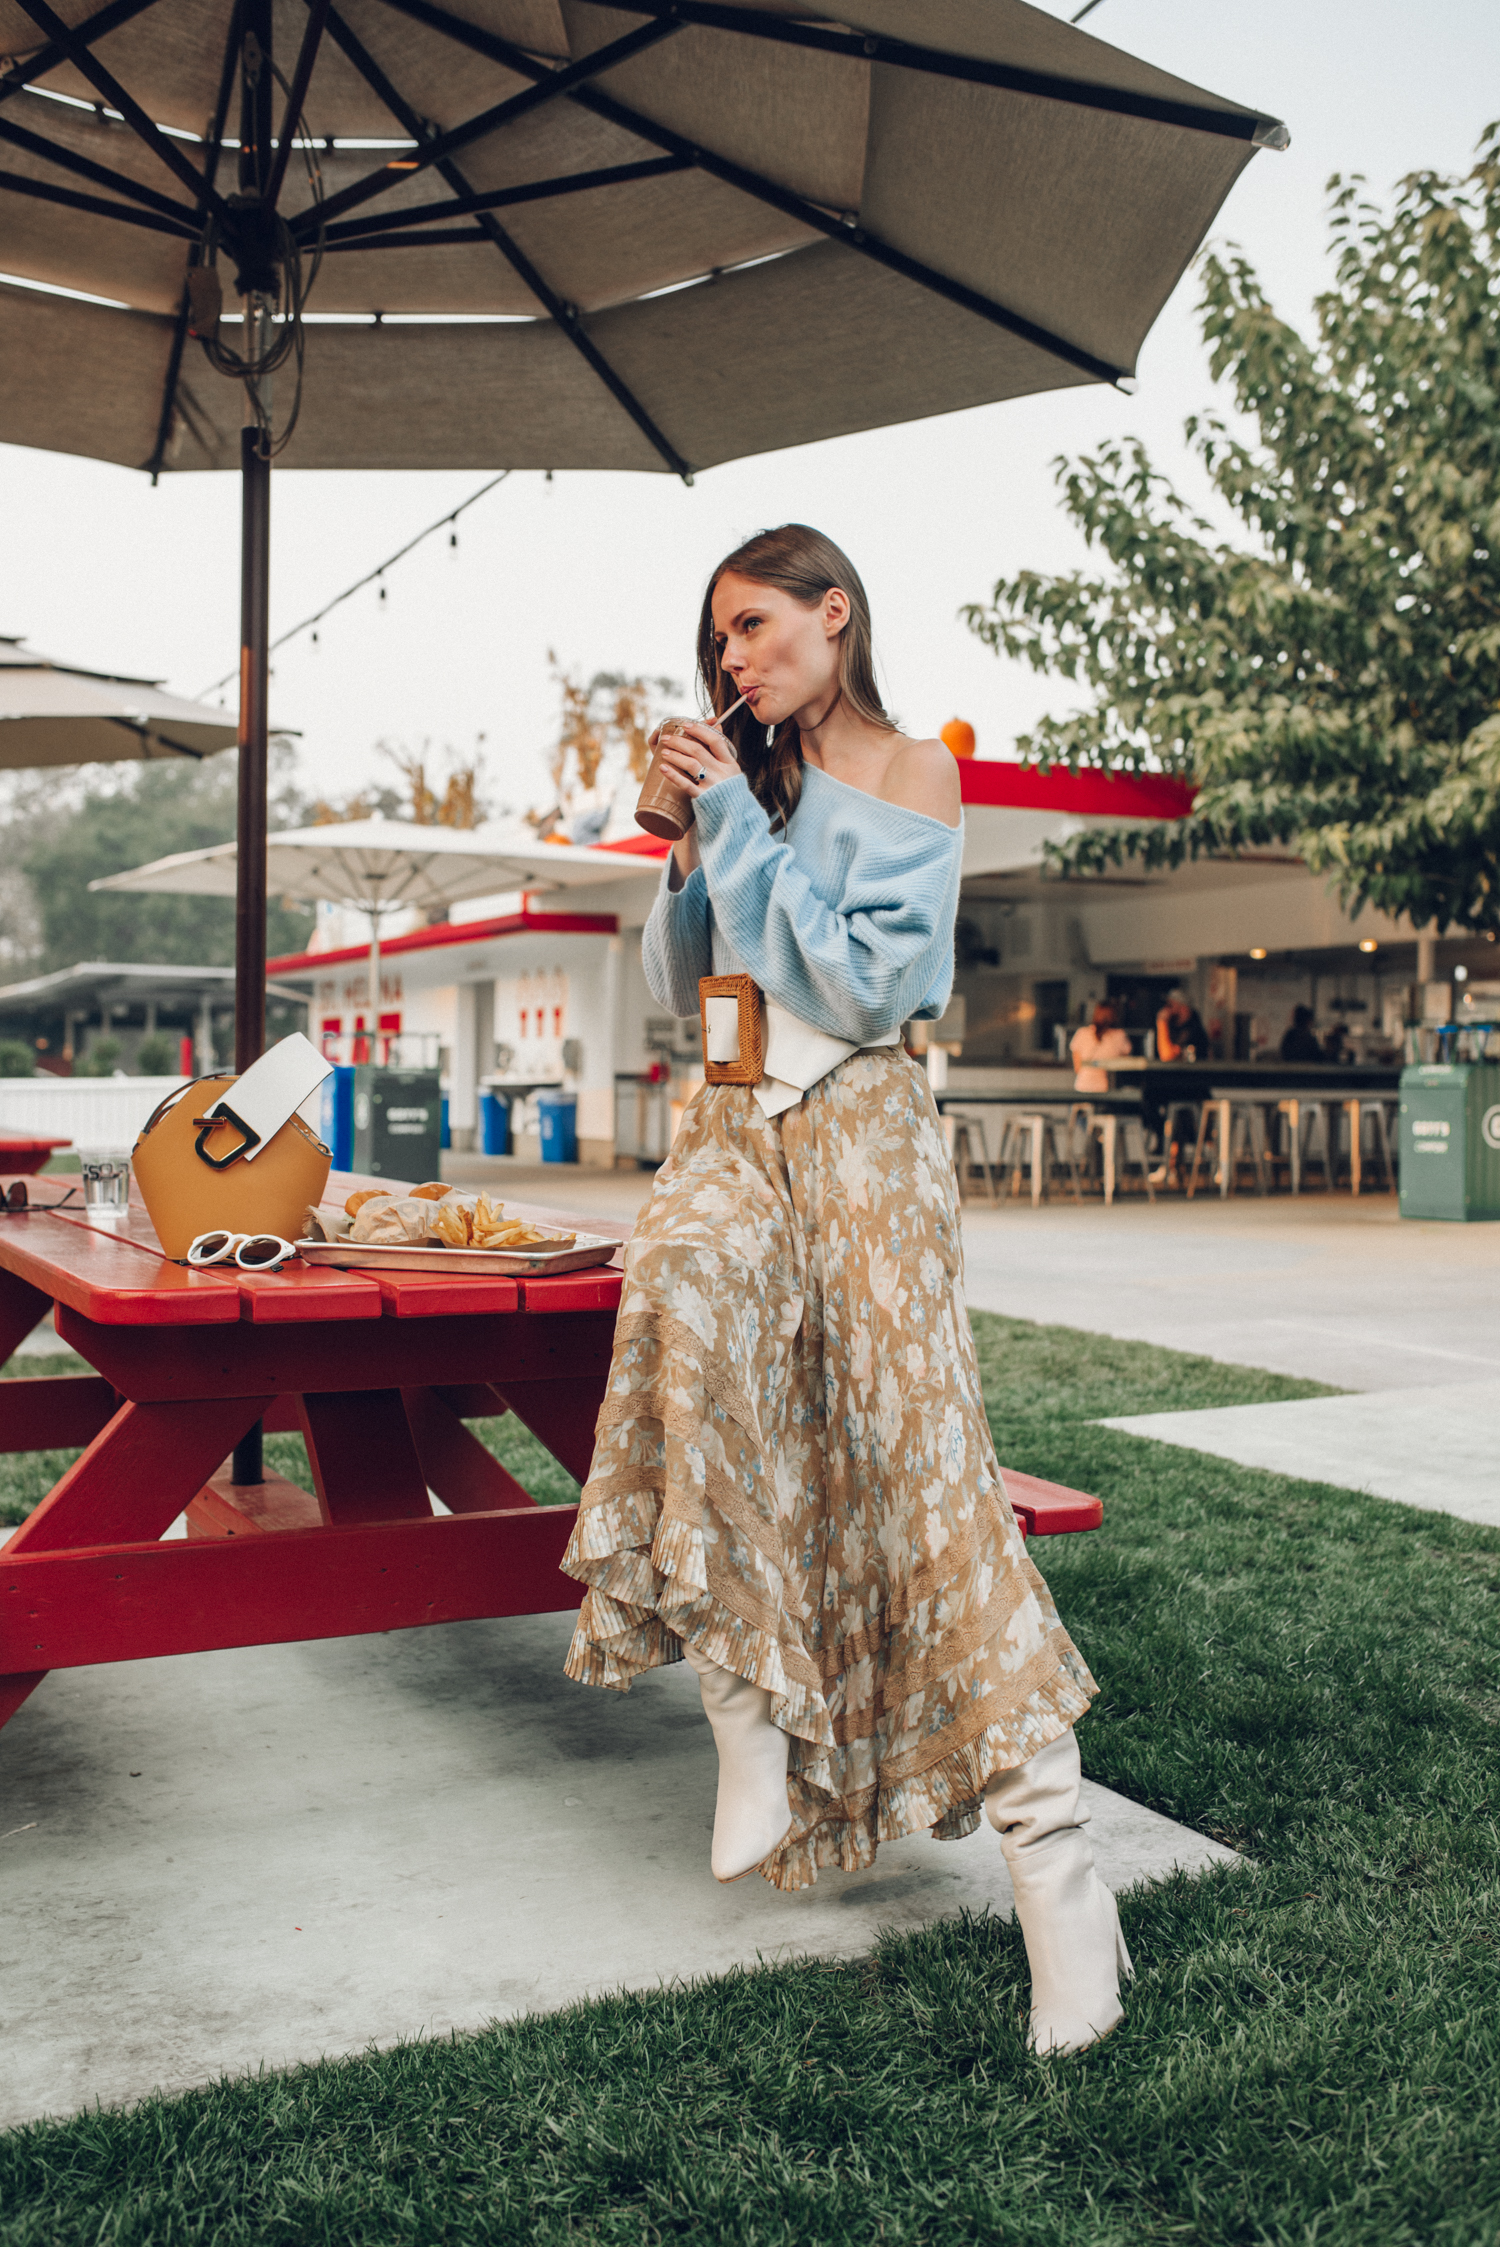 Alyssa Campanella of The A List blog visits Gott's Roadside in St. Helena for Cabernet season 2018 wearing Zimmermann hanky skirt, What For ivory boots, 360Cashmere Oneta sweater, and Danse Lente bucket bag